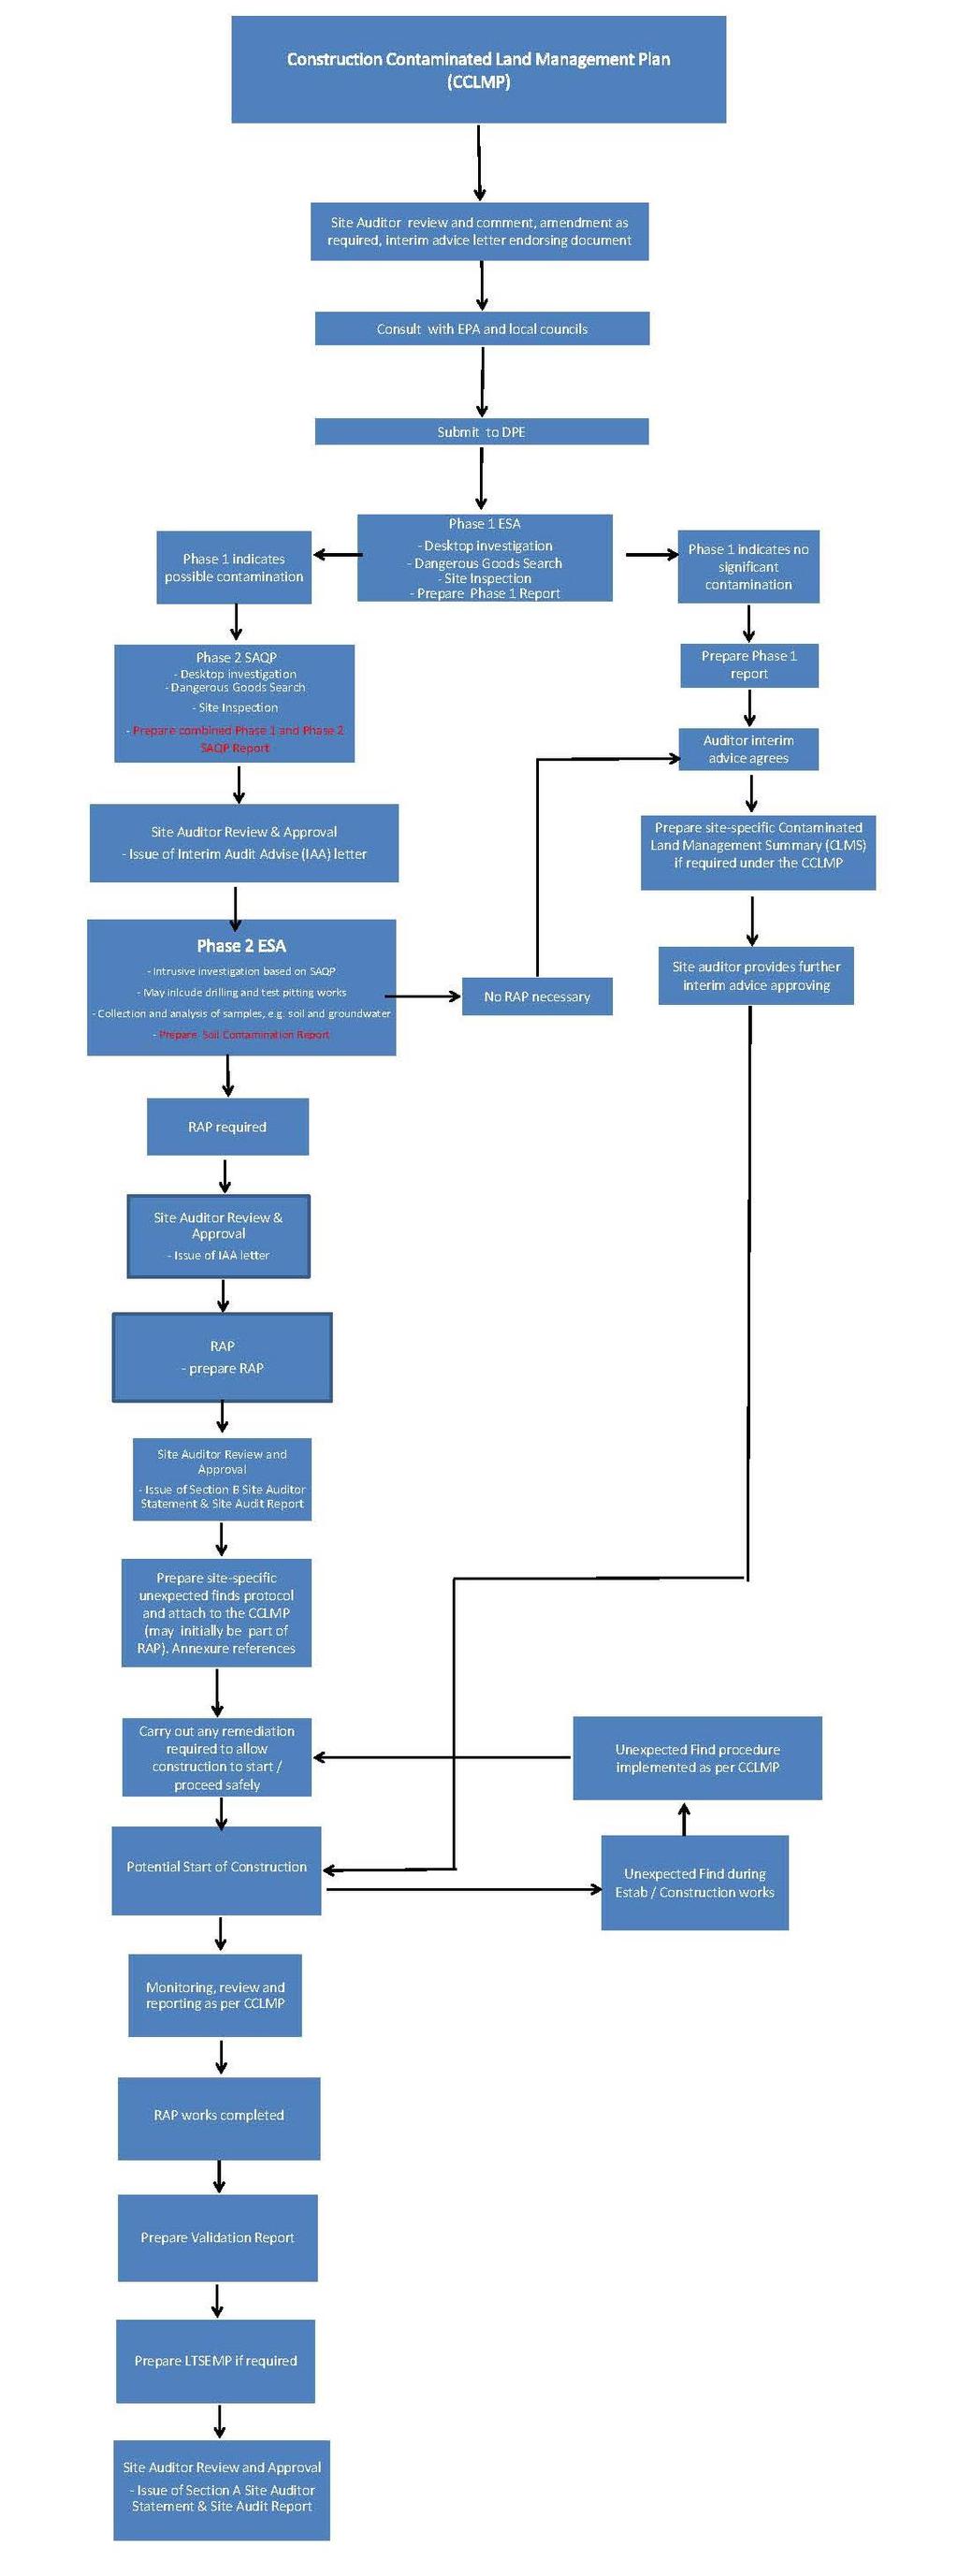 Construction Contaminated Land Figure 1: Contamination Assessment and Management Process Flow Chart 1 Assumed to include: City of Sydney Council, Marrickville Council, Rockdale City Council, City